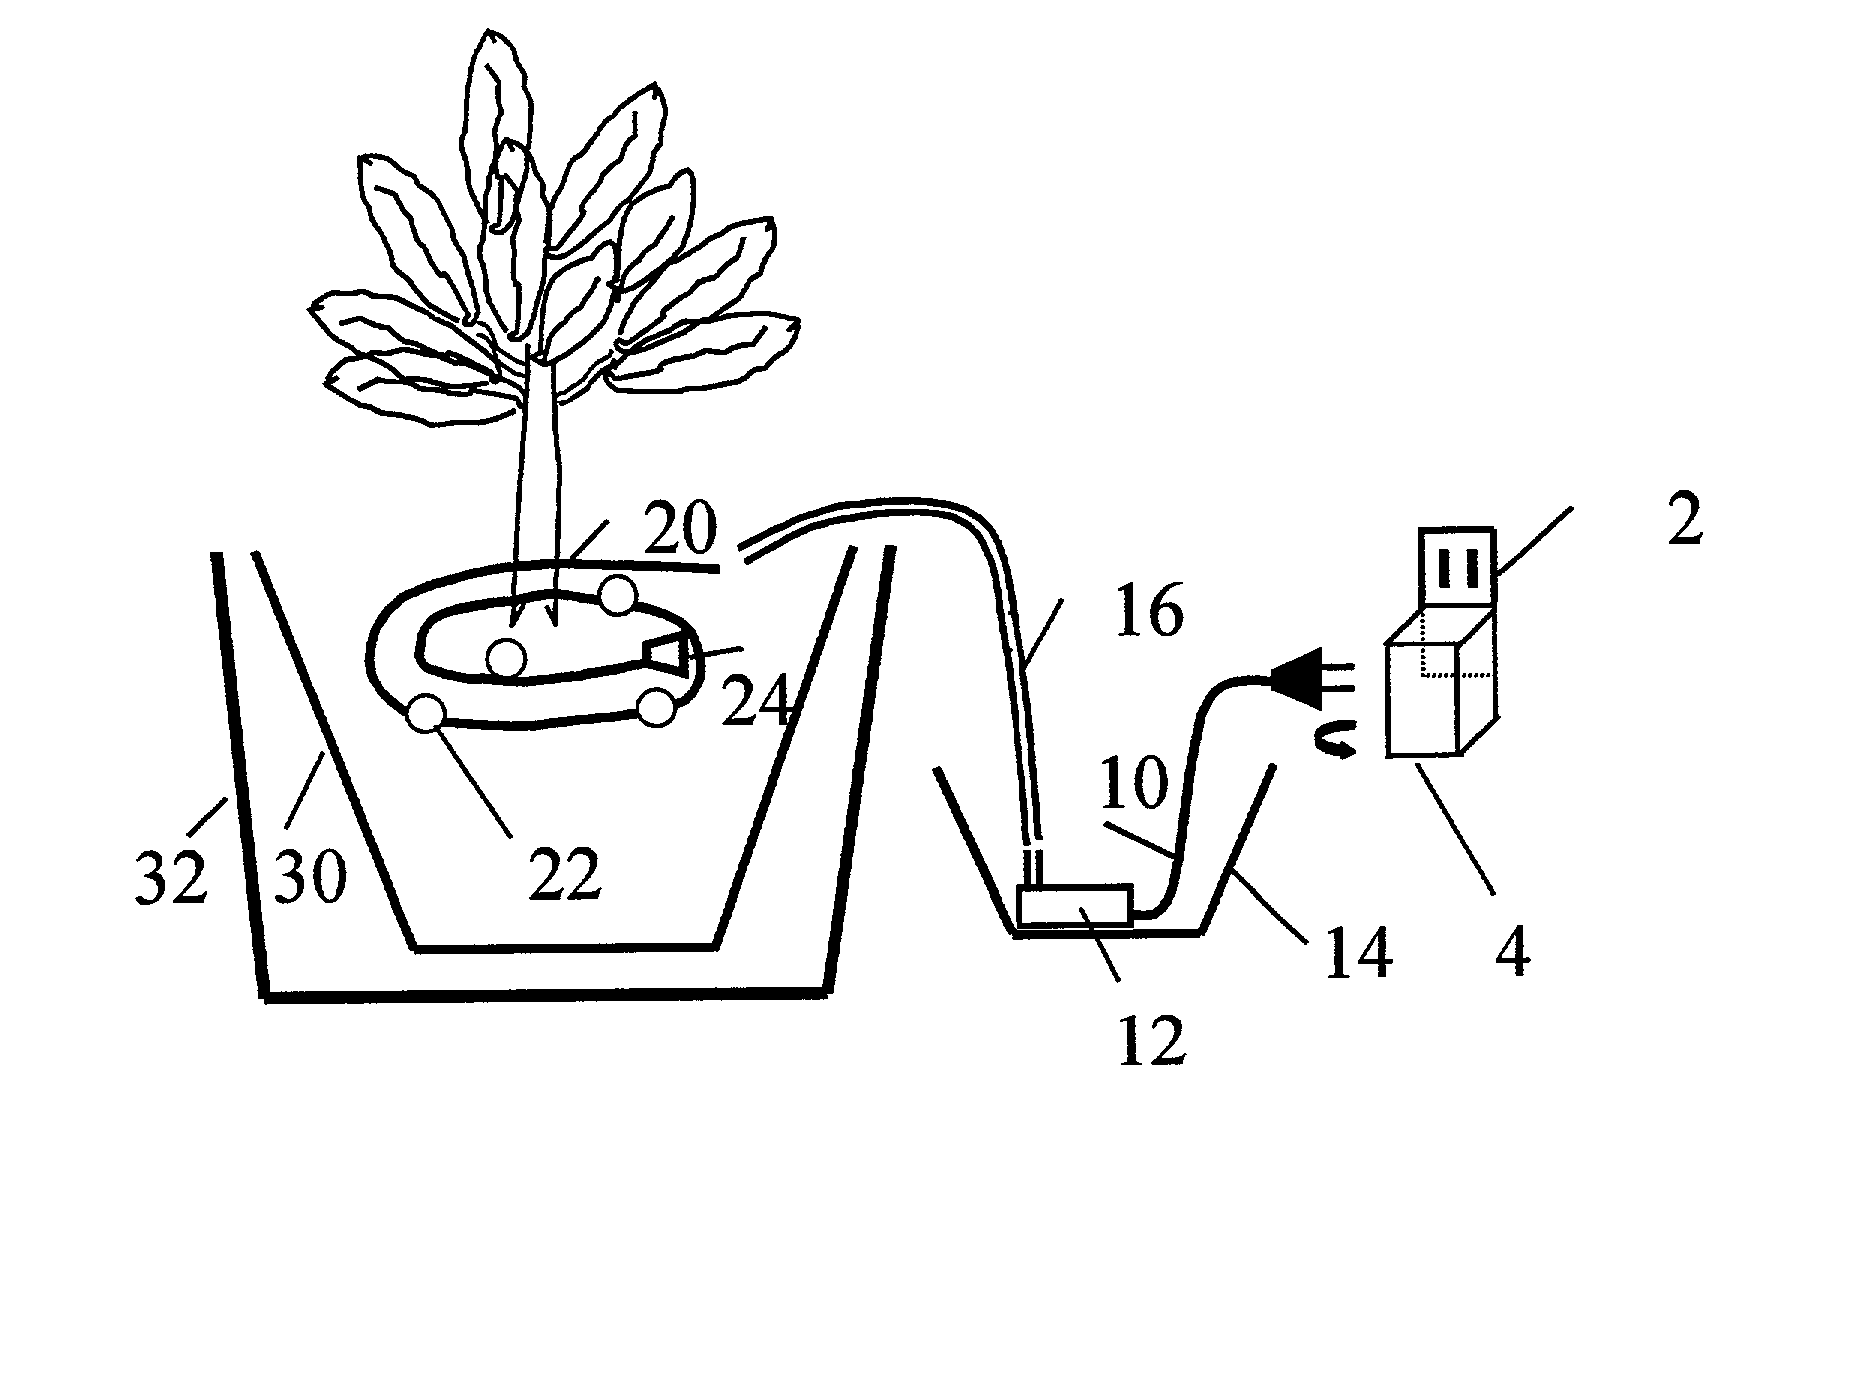 Automatic houseplant watering apparatus for homes and offices